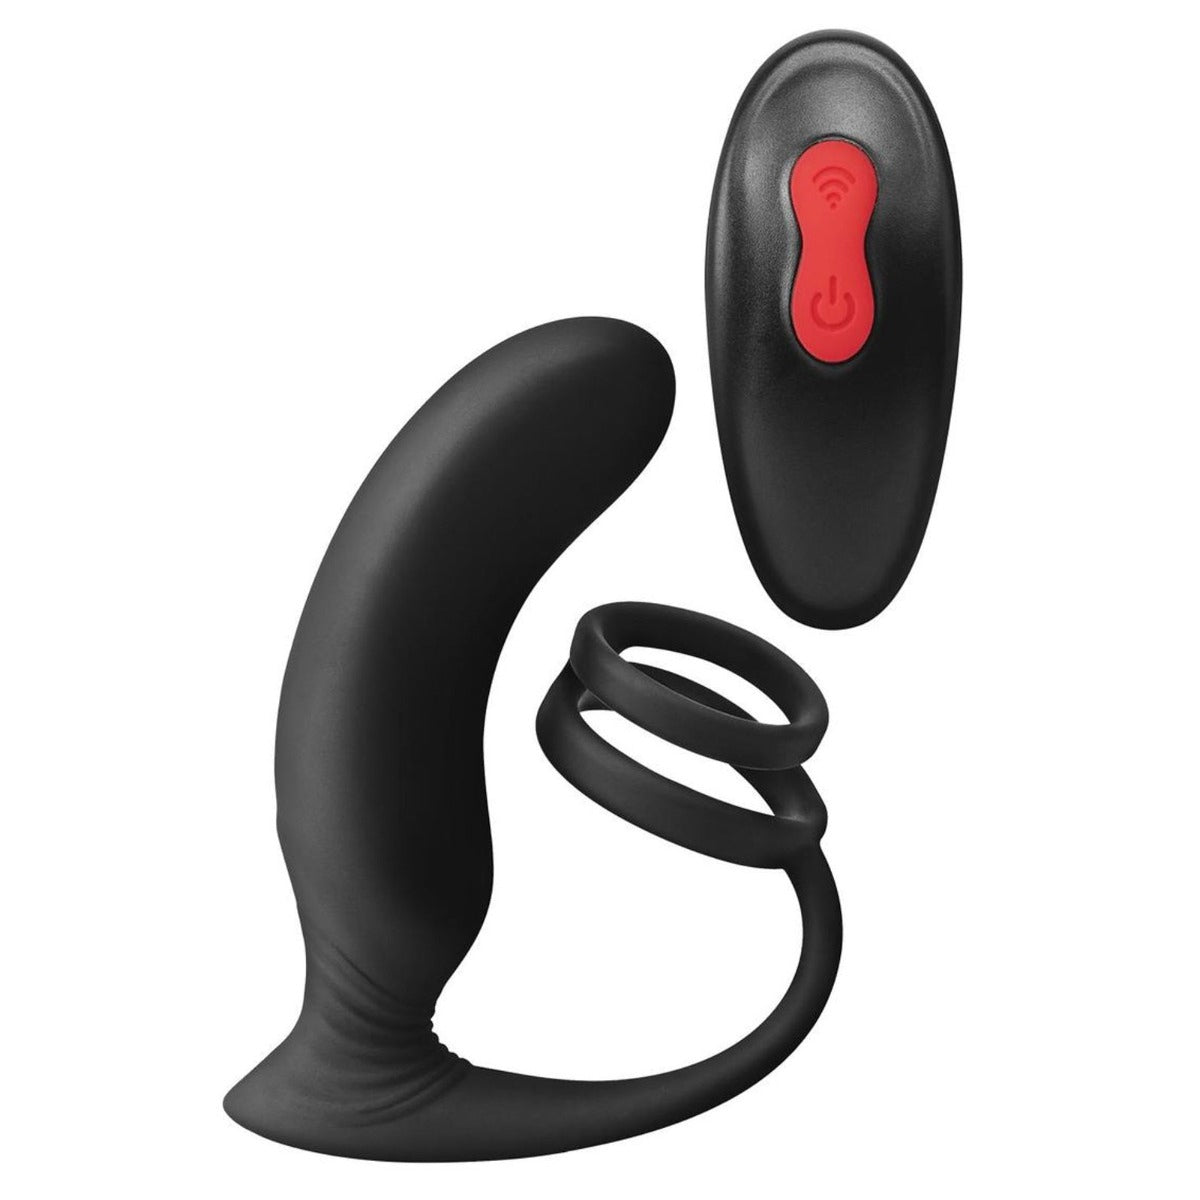 Envy Thumbs Up P-Spot Prostate Vibrator With Cock & Ball Ring Black